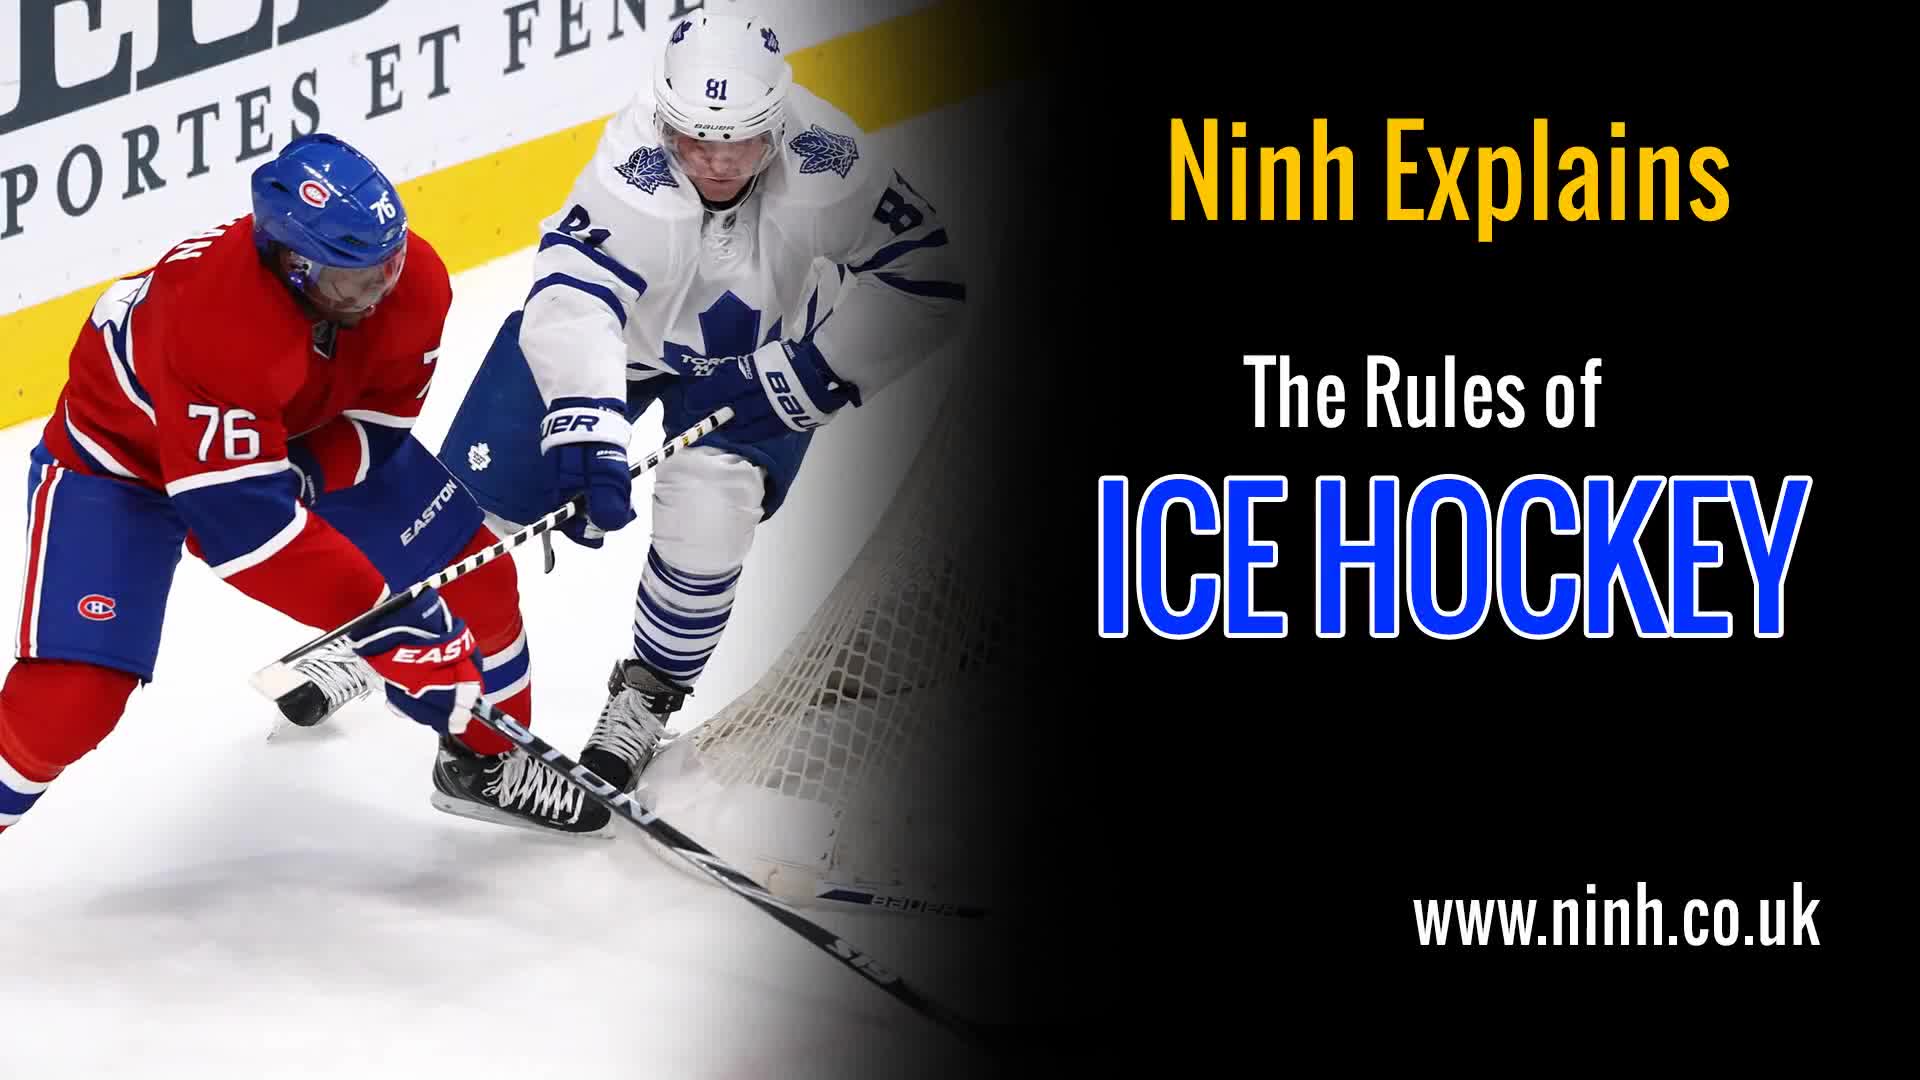 learn about icing, offside, powerplay, penalty shots and more